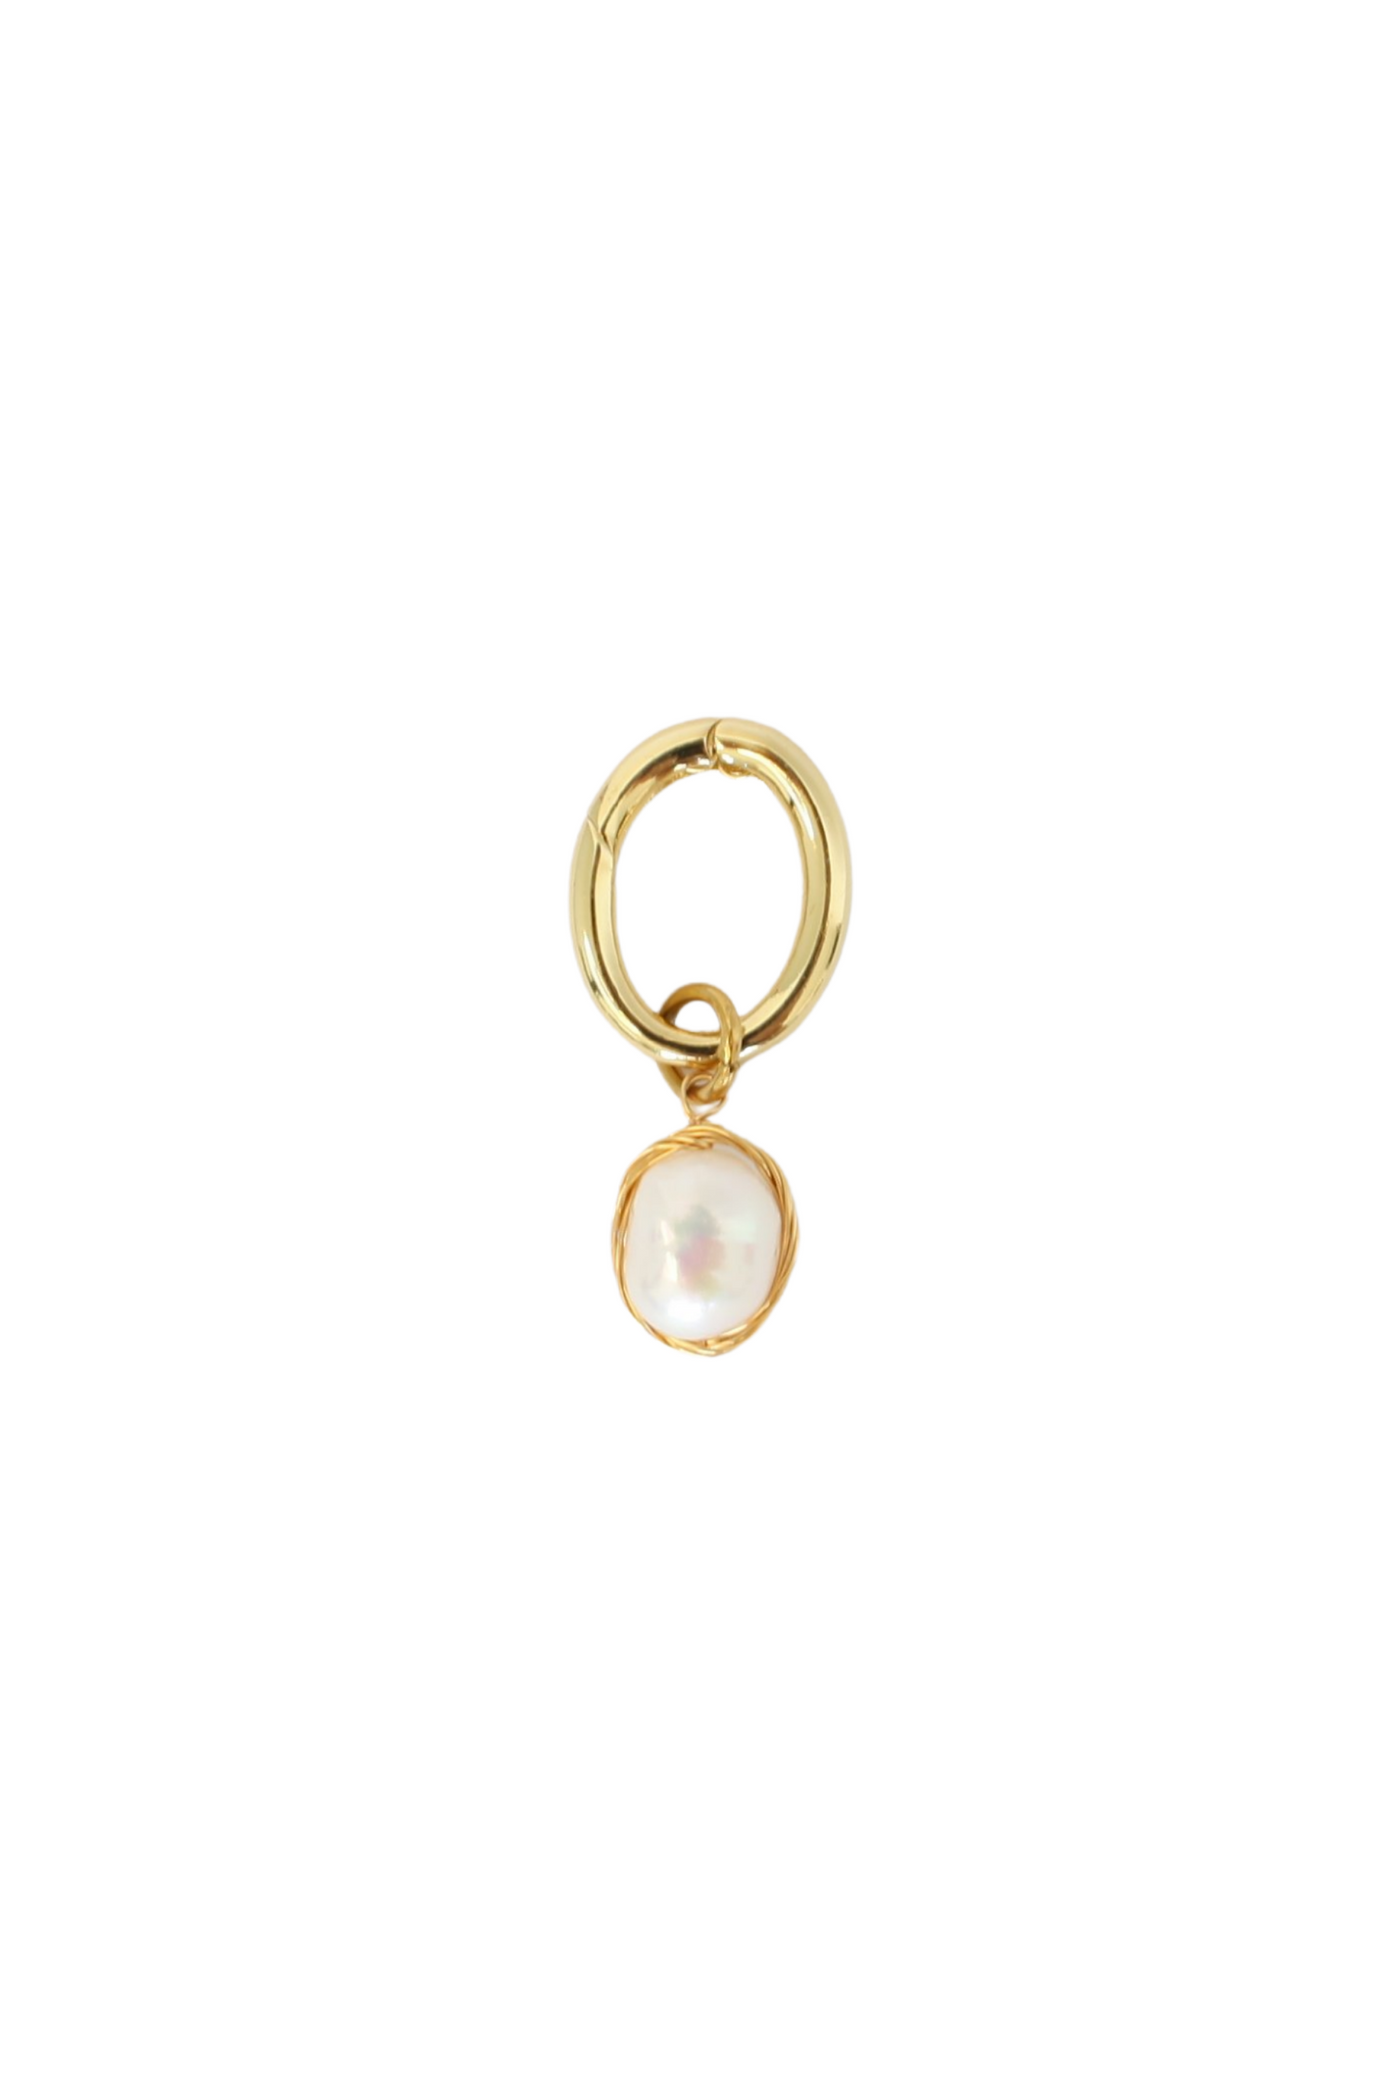 The Elsewhere Co. Freshwater Pearl Charm, avilable on ZERRIN with free Singapore shipping